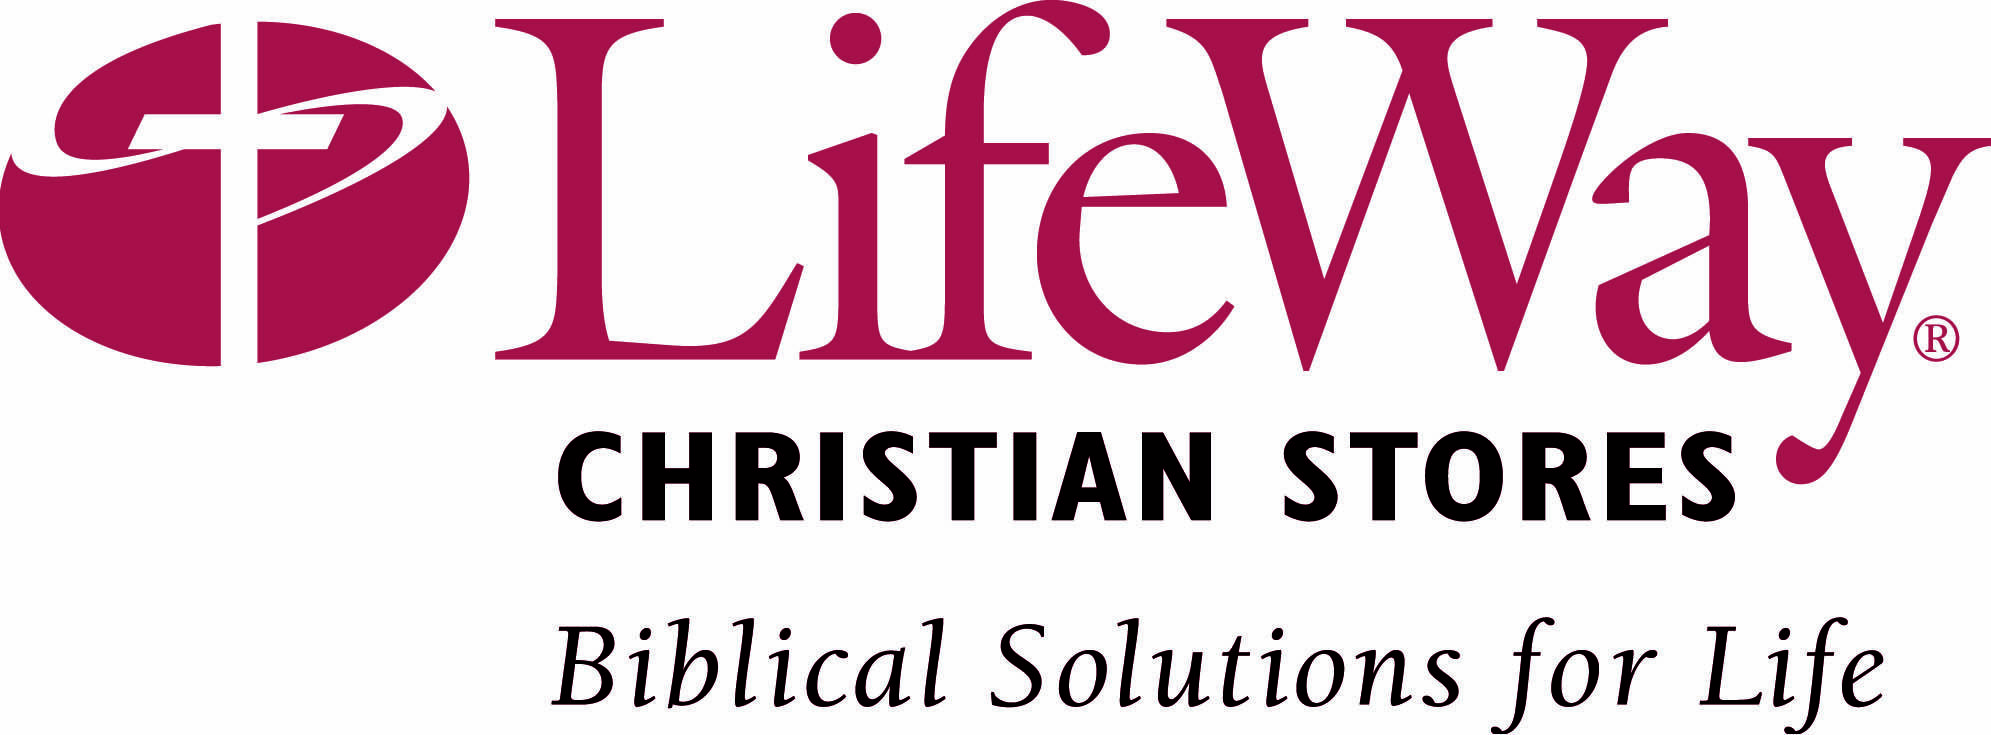 LifeWay Logo - LifeWay Christian Stores to Host Compassion International Day in 186